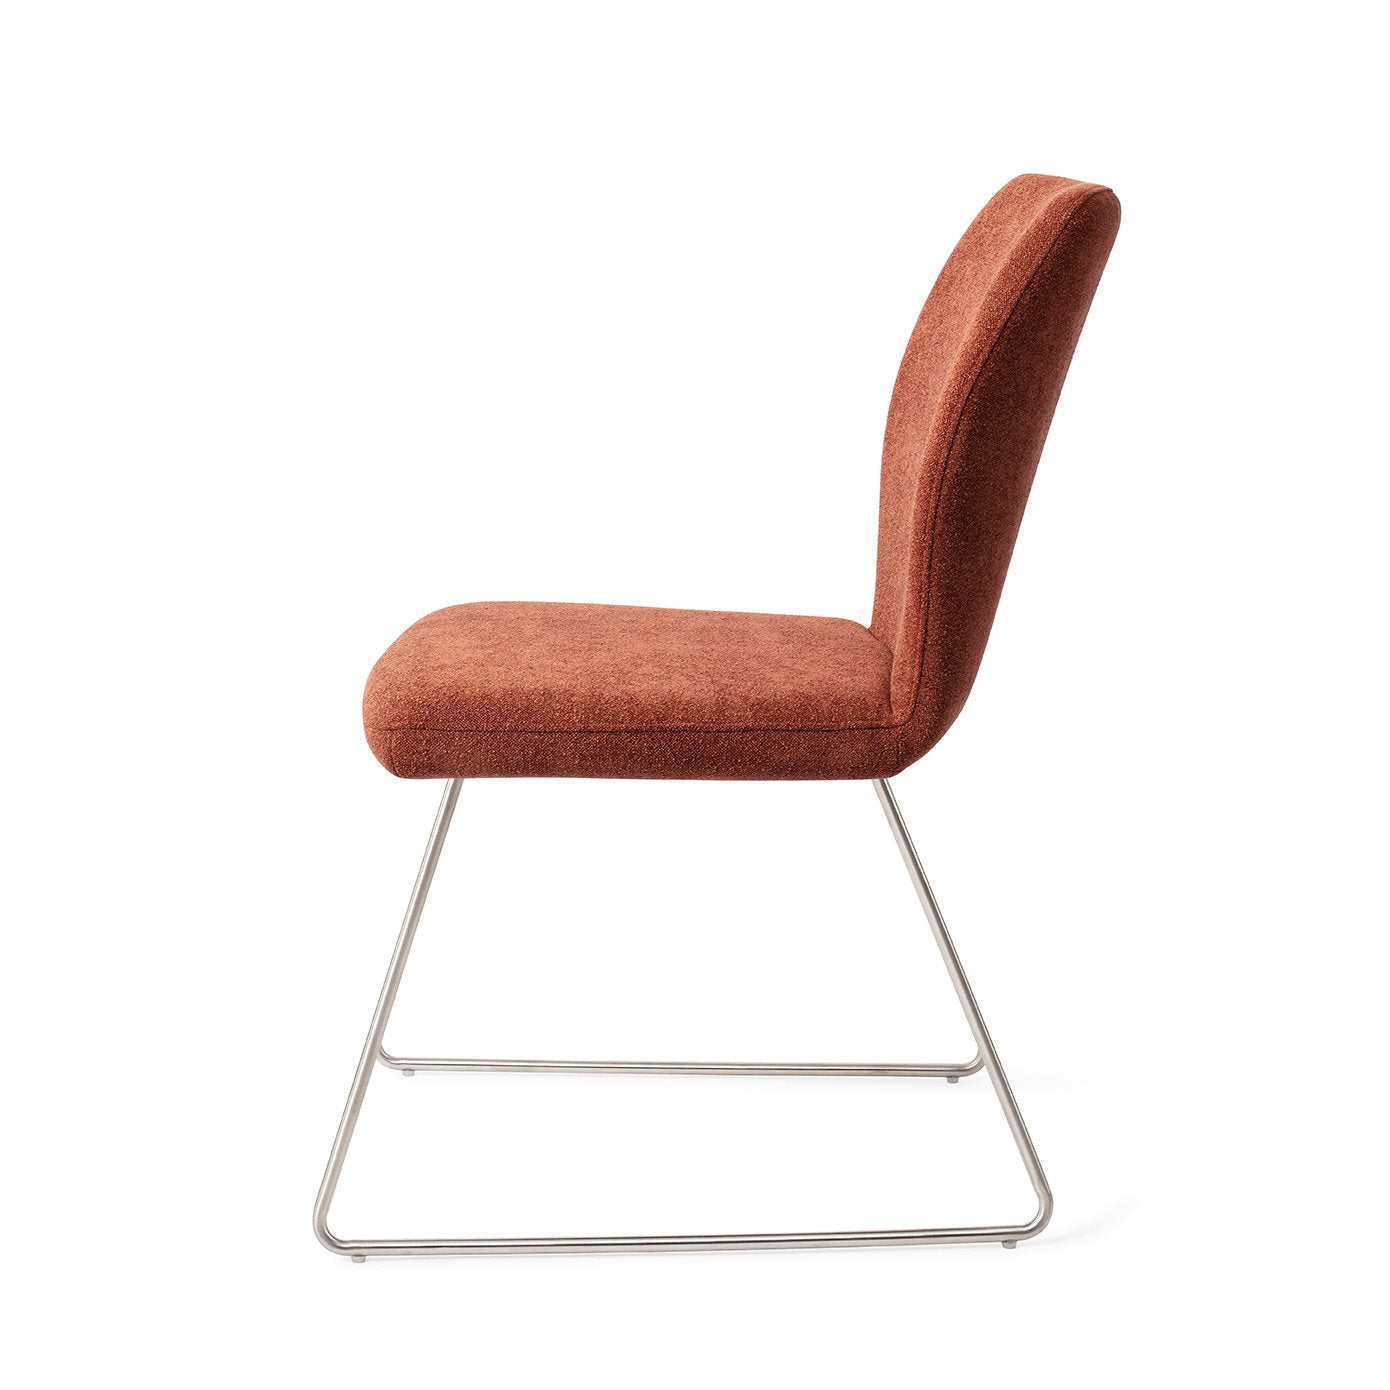 Ikata Dining Chair Cosy Copper Slide Steel